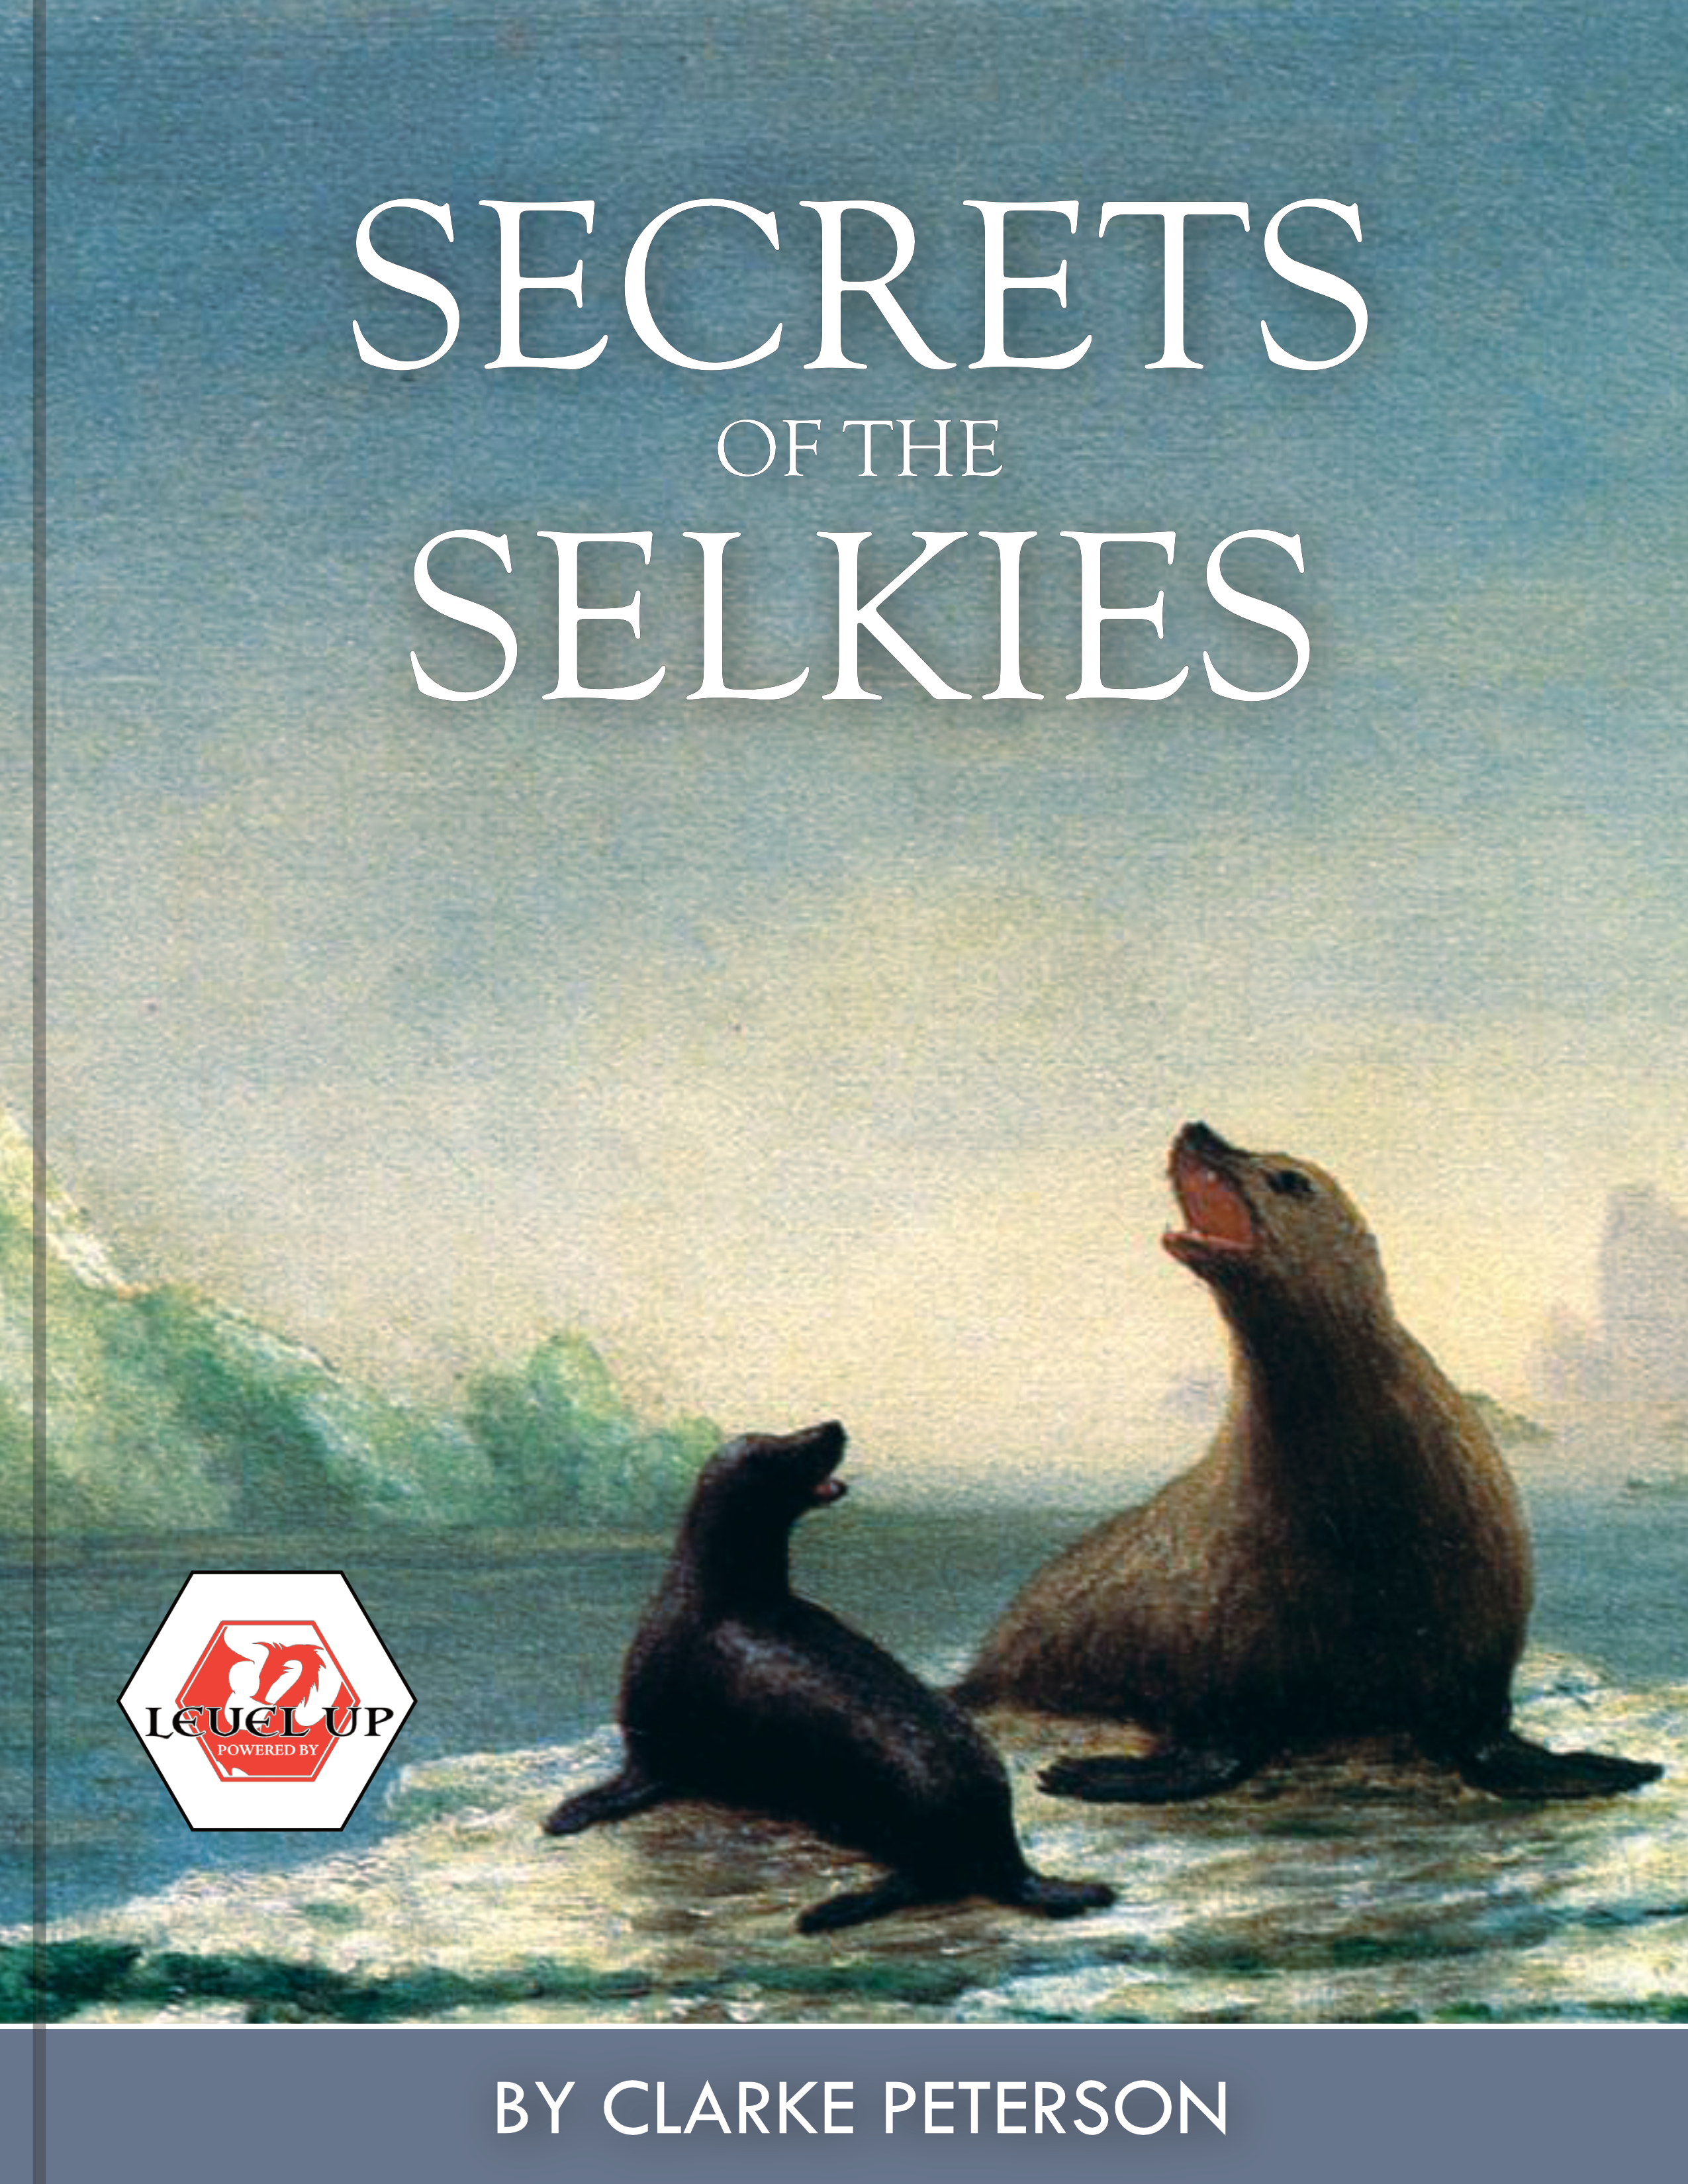 Secrets of the Selkies - Draft Cover.png